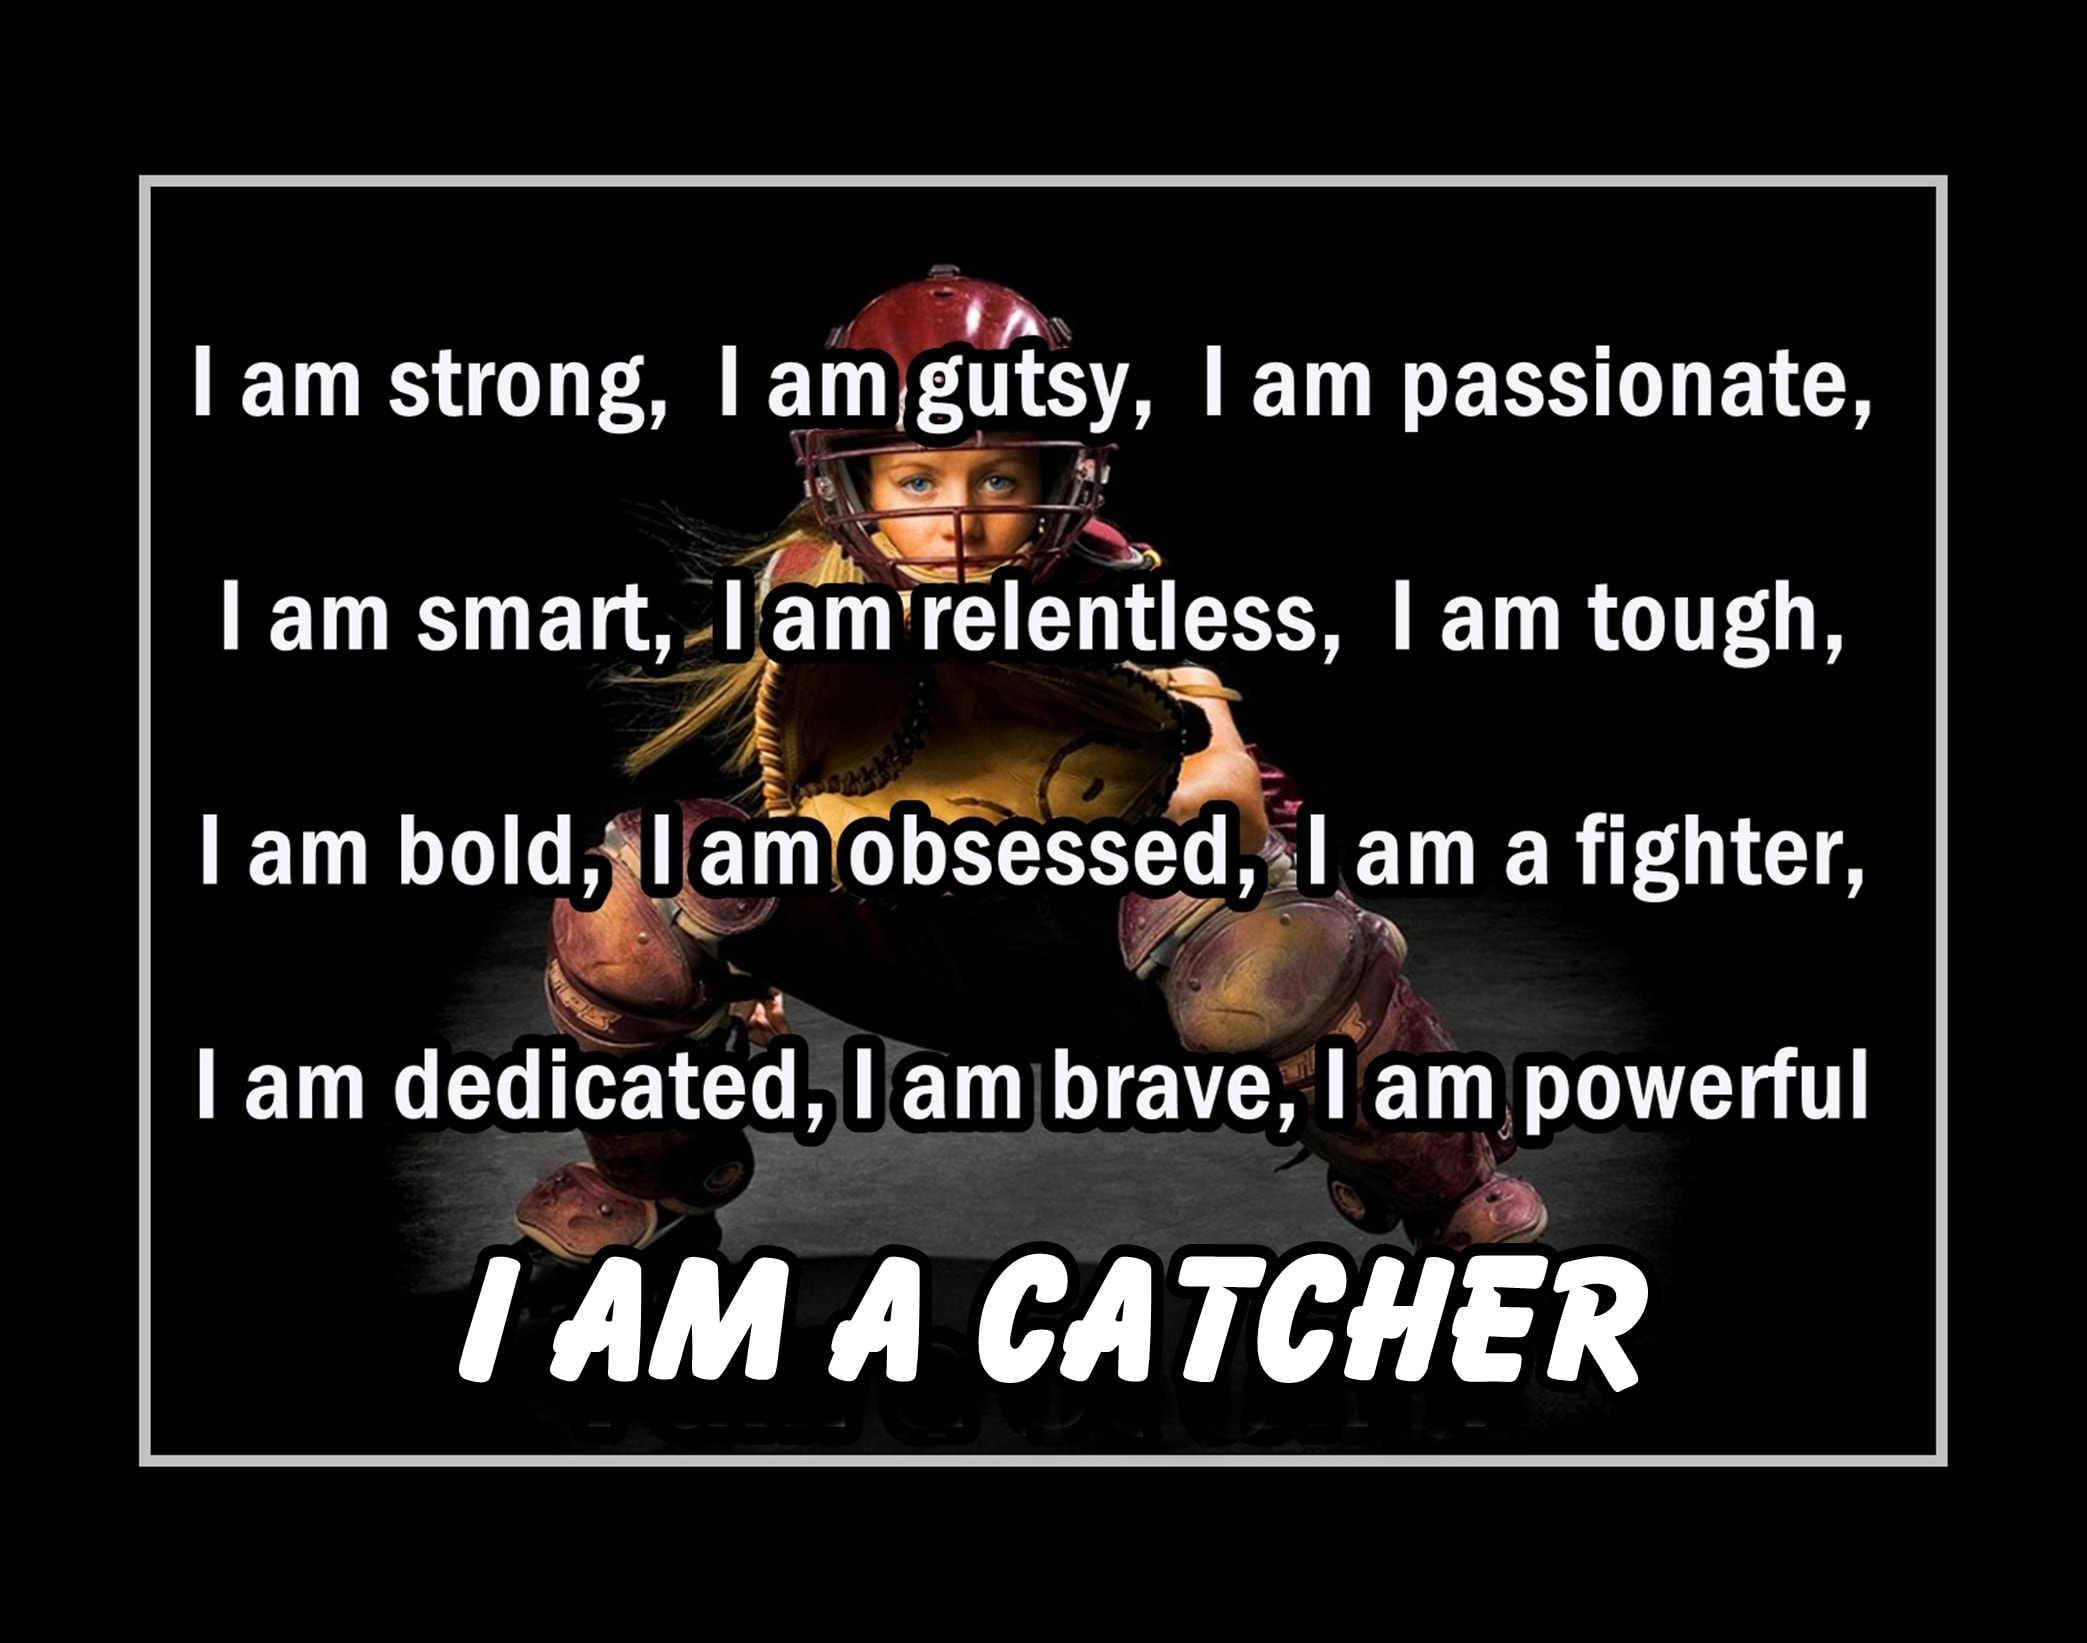 Fuel Your Passion for Softball: Softball quotes inspirational to Ignite Your Love for the Game